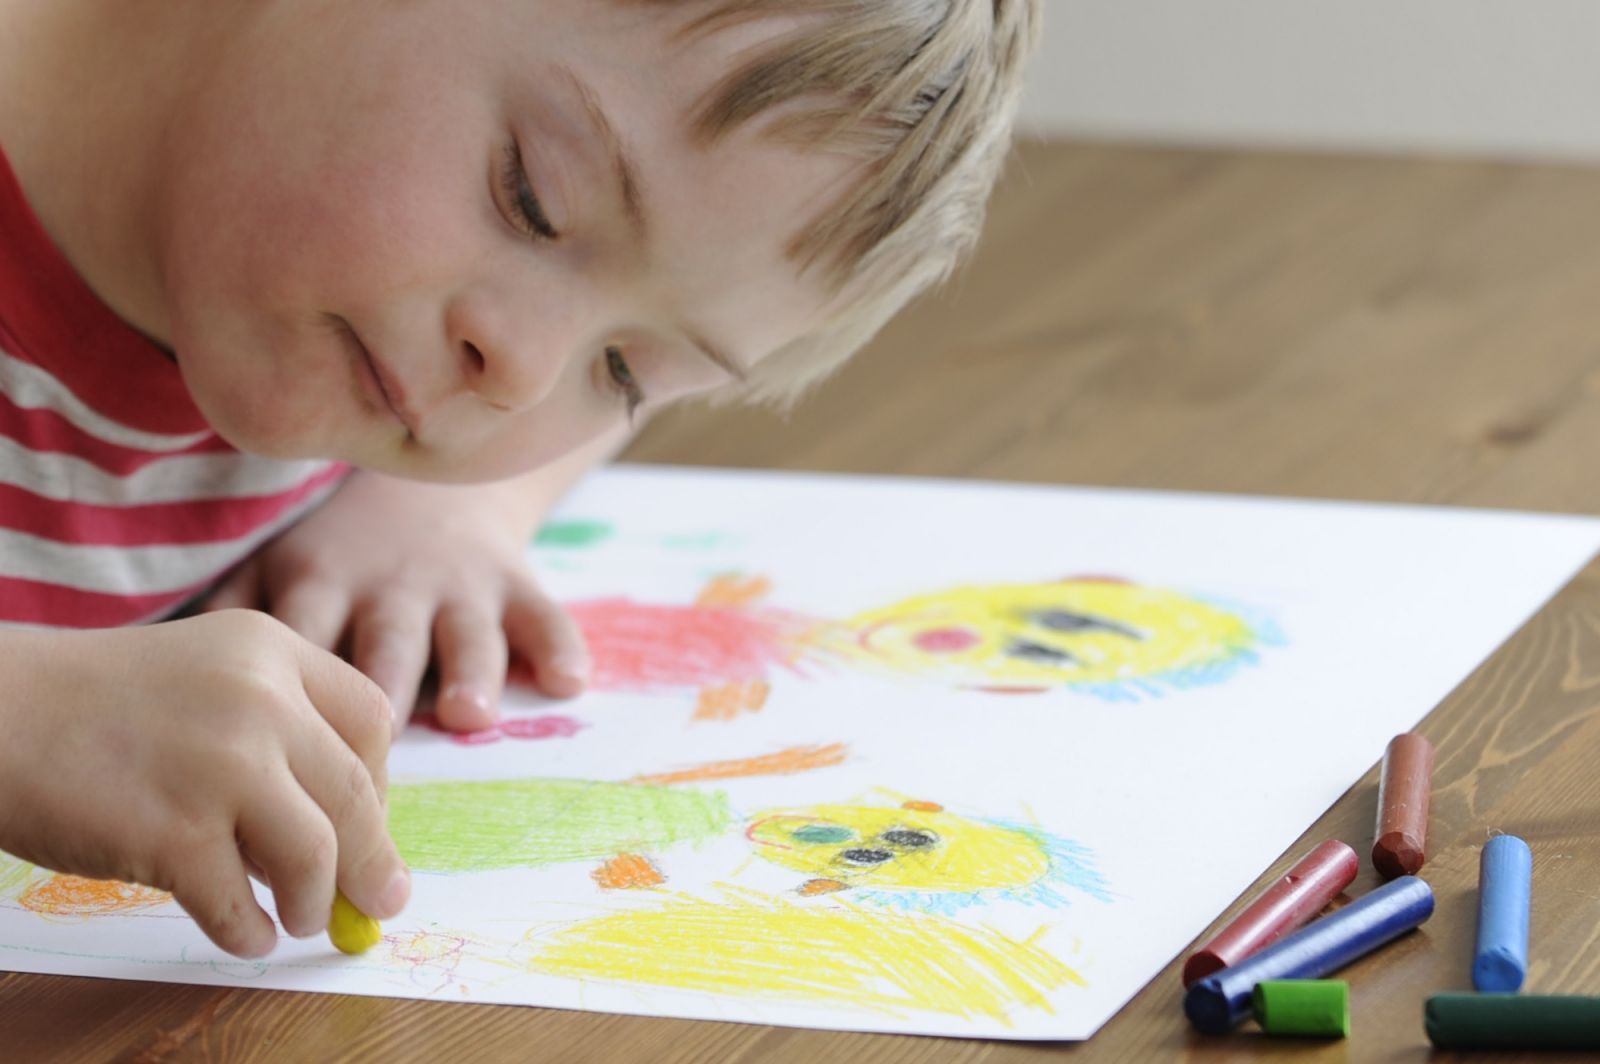 Boy with Down's Syndrome coloring a picture